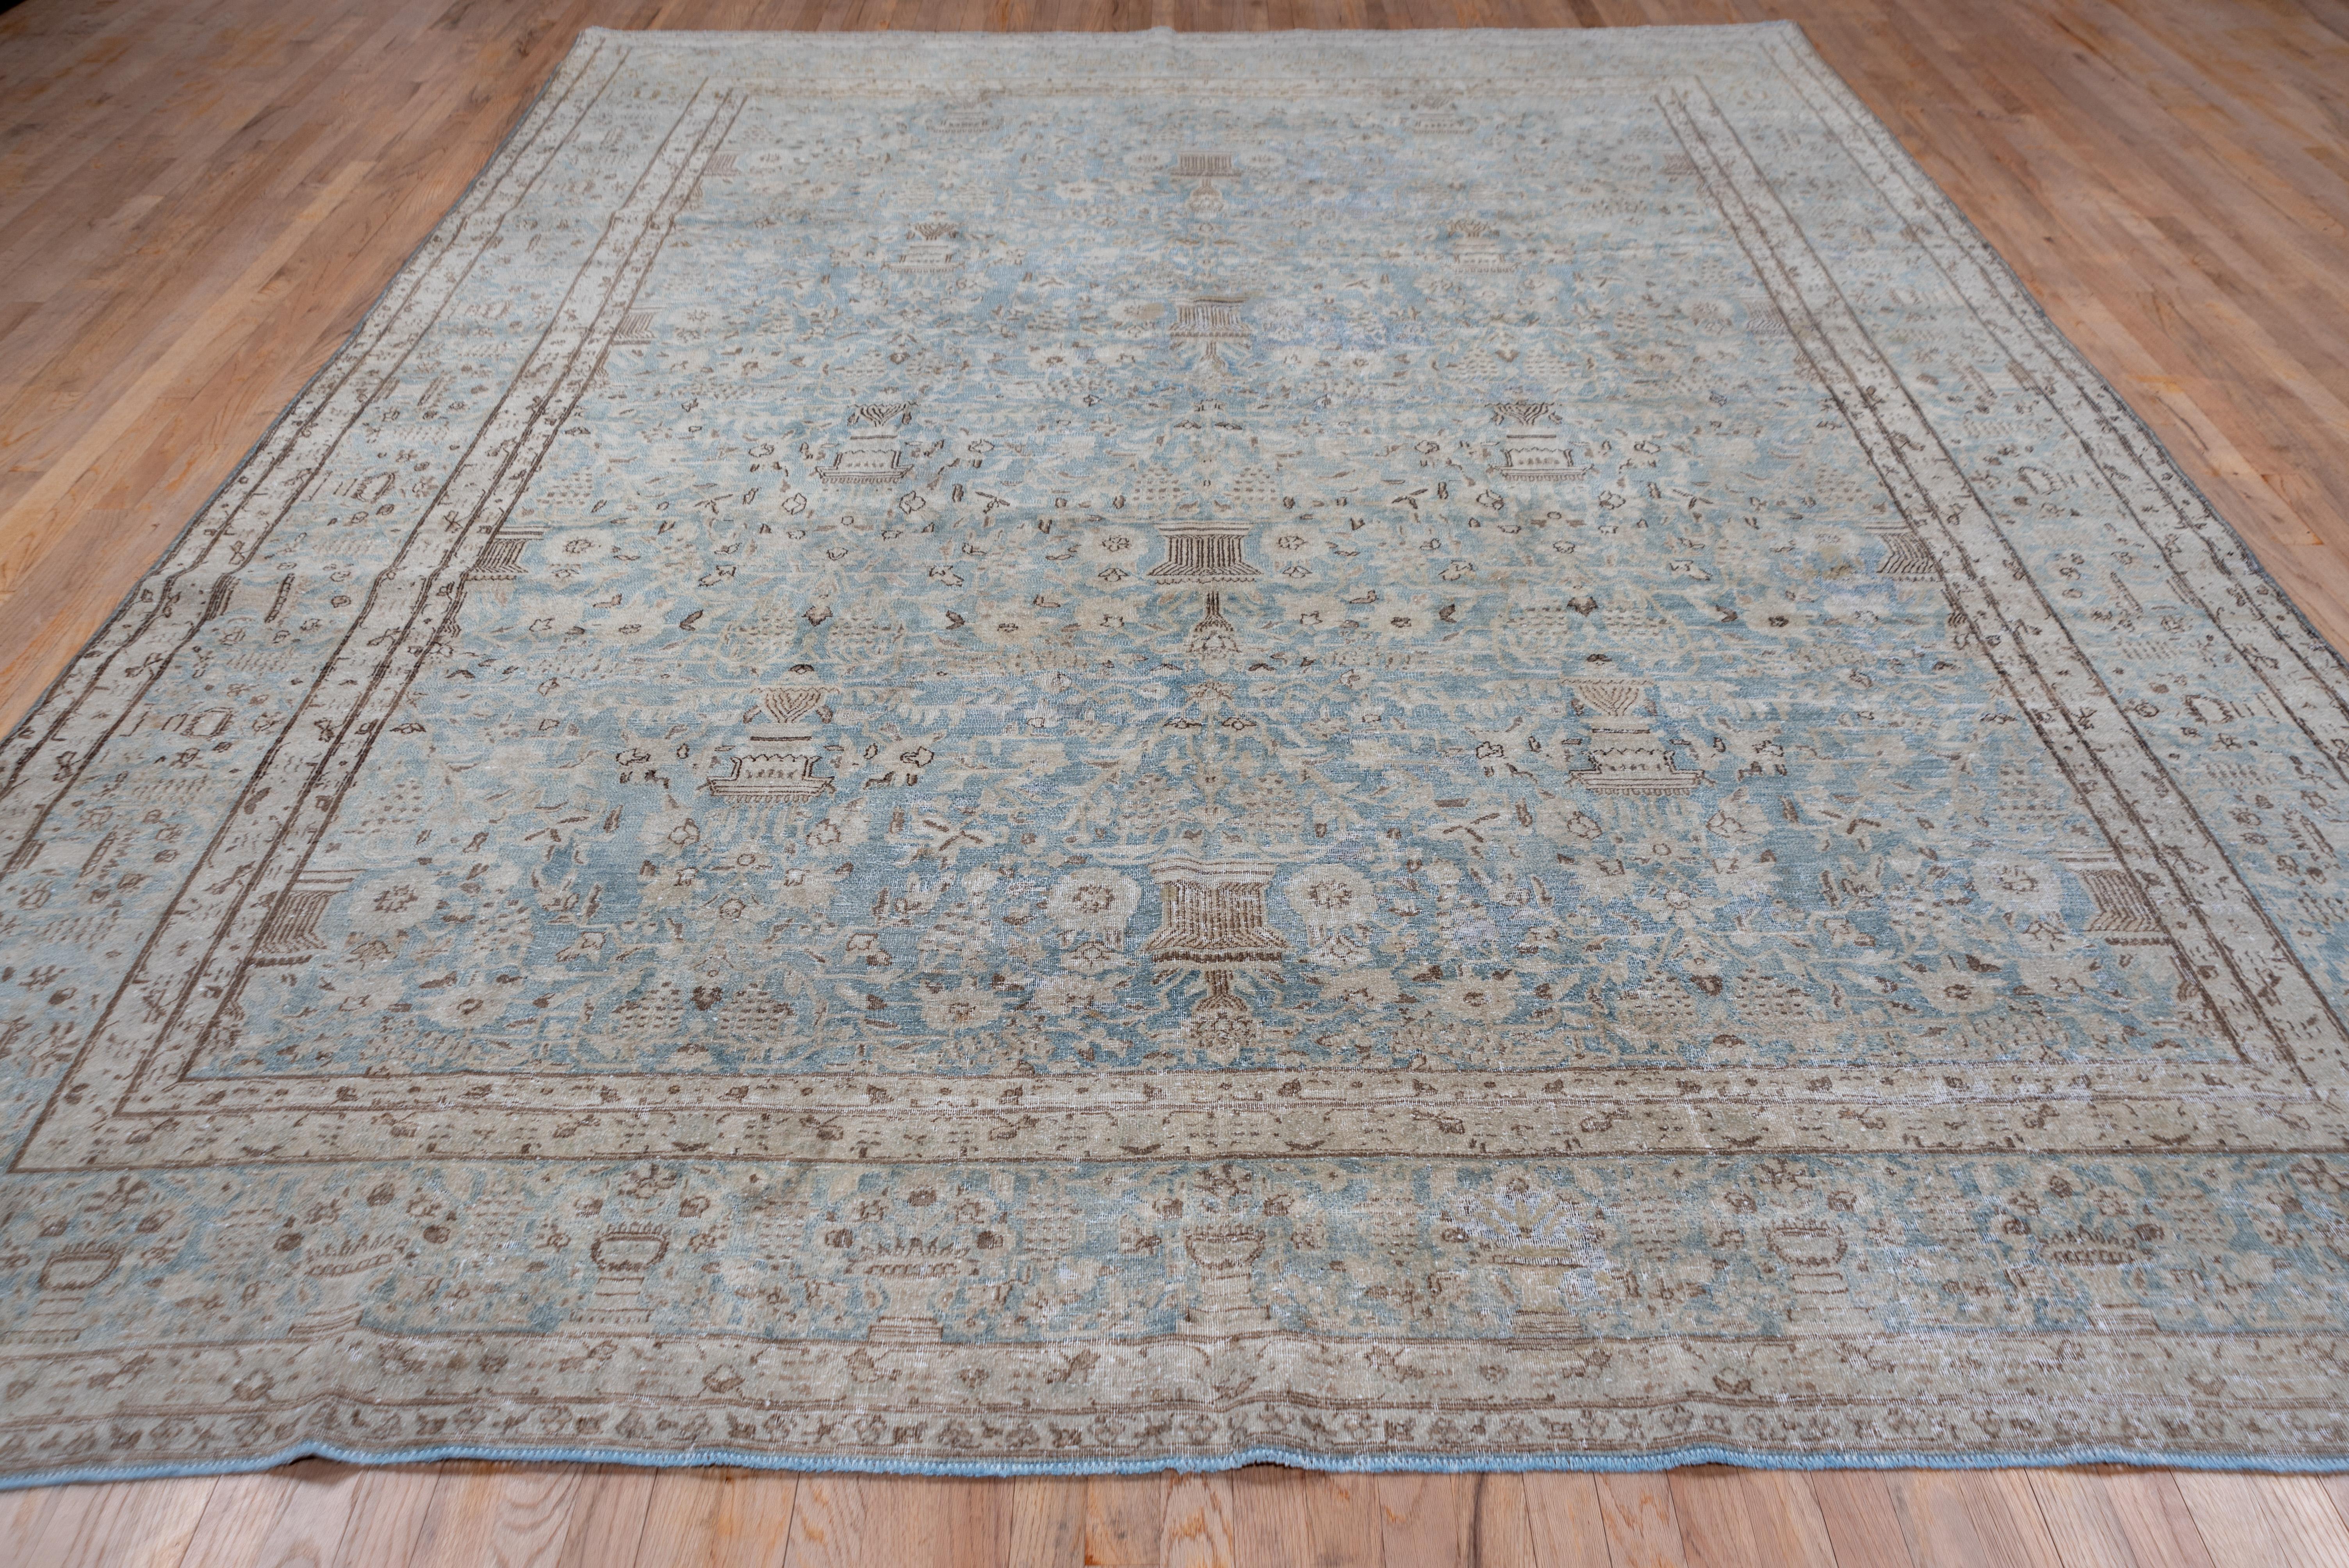 Light Blue Antique Persian Kerman Carpet with Vase Design, Allover Field In Good Condition For Sale In New York, NY